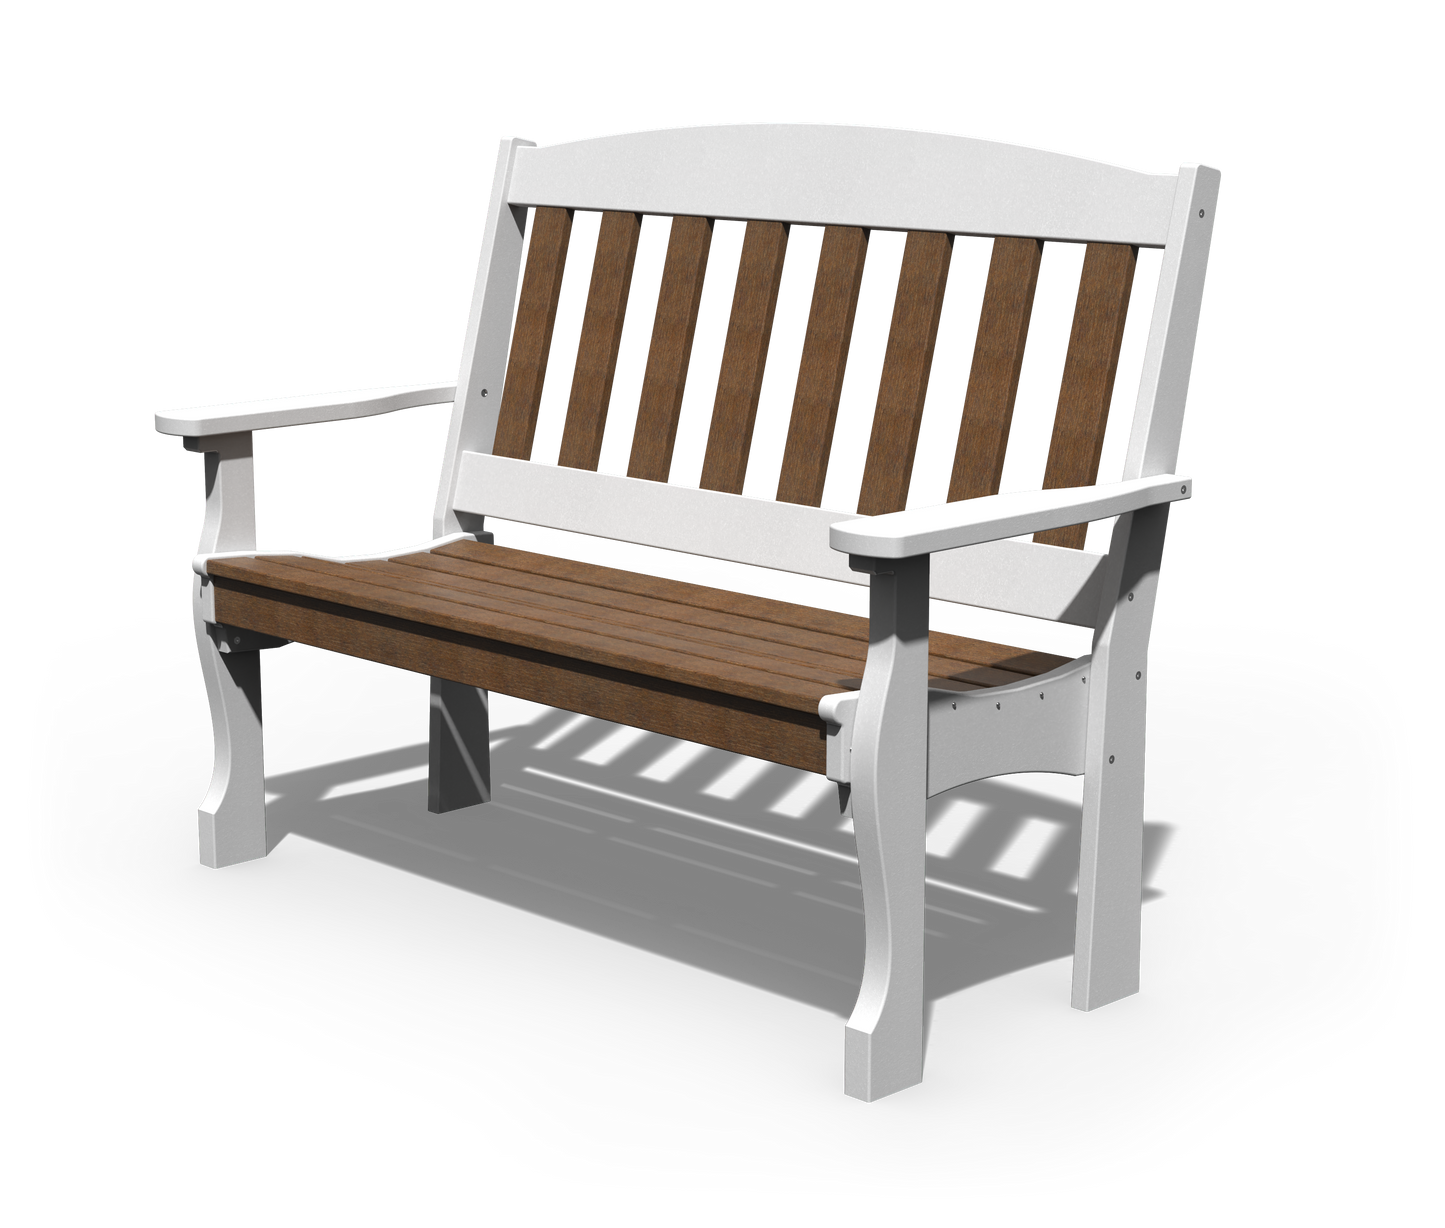 Patiova Recycled Plastic 4' English Garden Bench - LEAD TIME TO SHIP 3 WEEKS